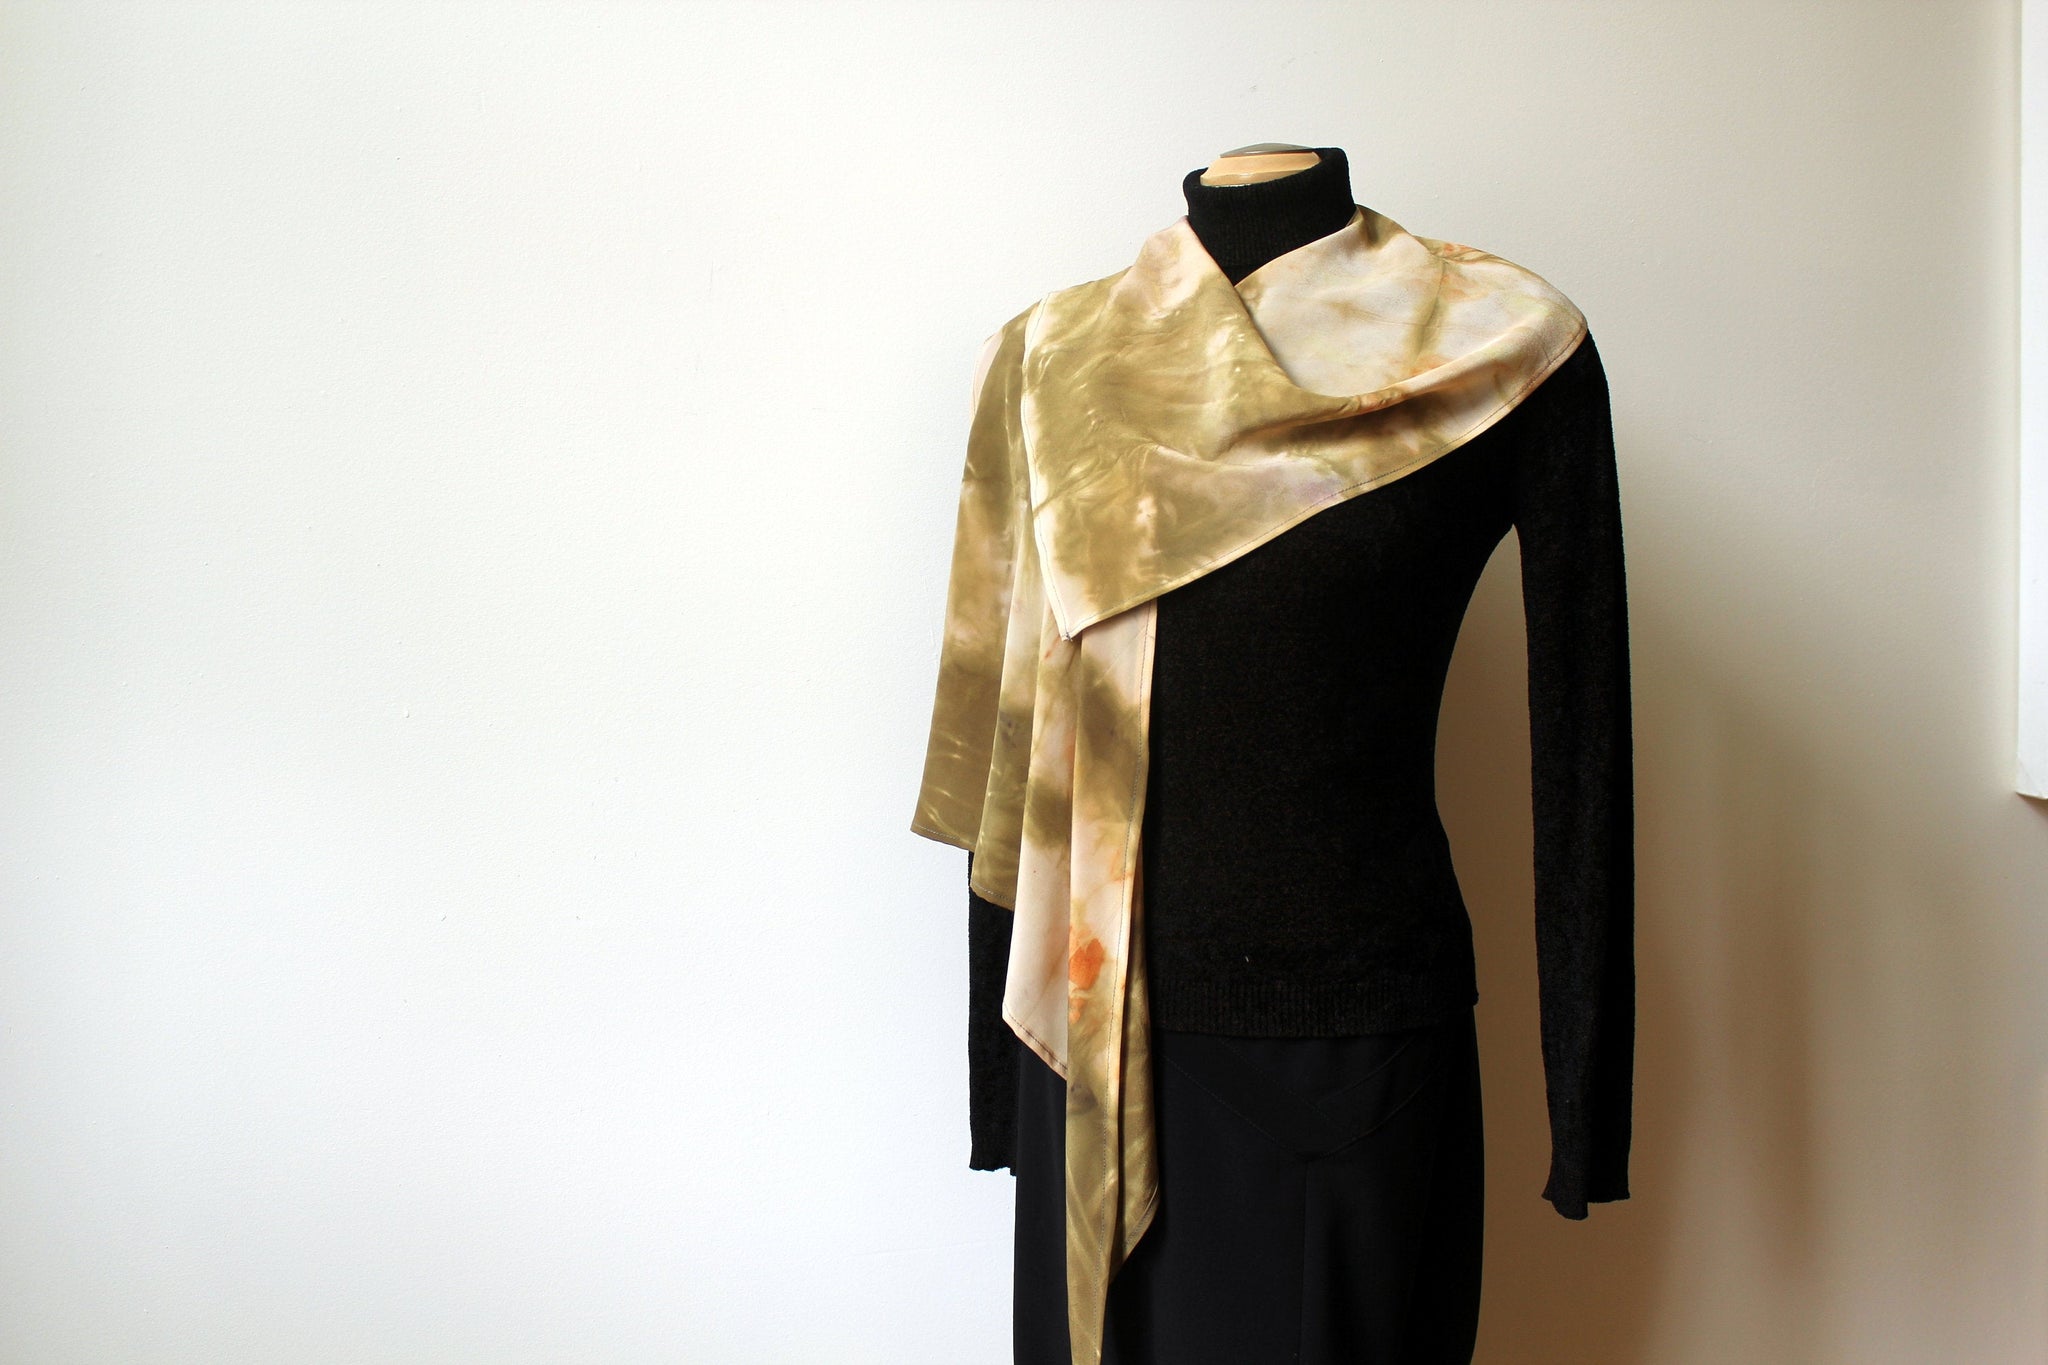 Eco dyed luxurious silk crepe-de-chine. Special cut lets you wear it as poncho or a scarf. Very versatile. Beautiful natural shades.